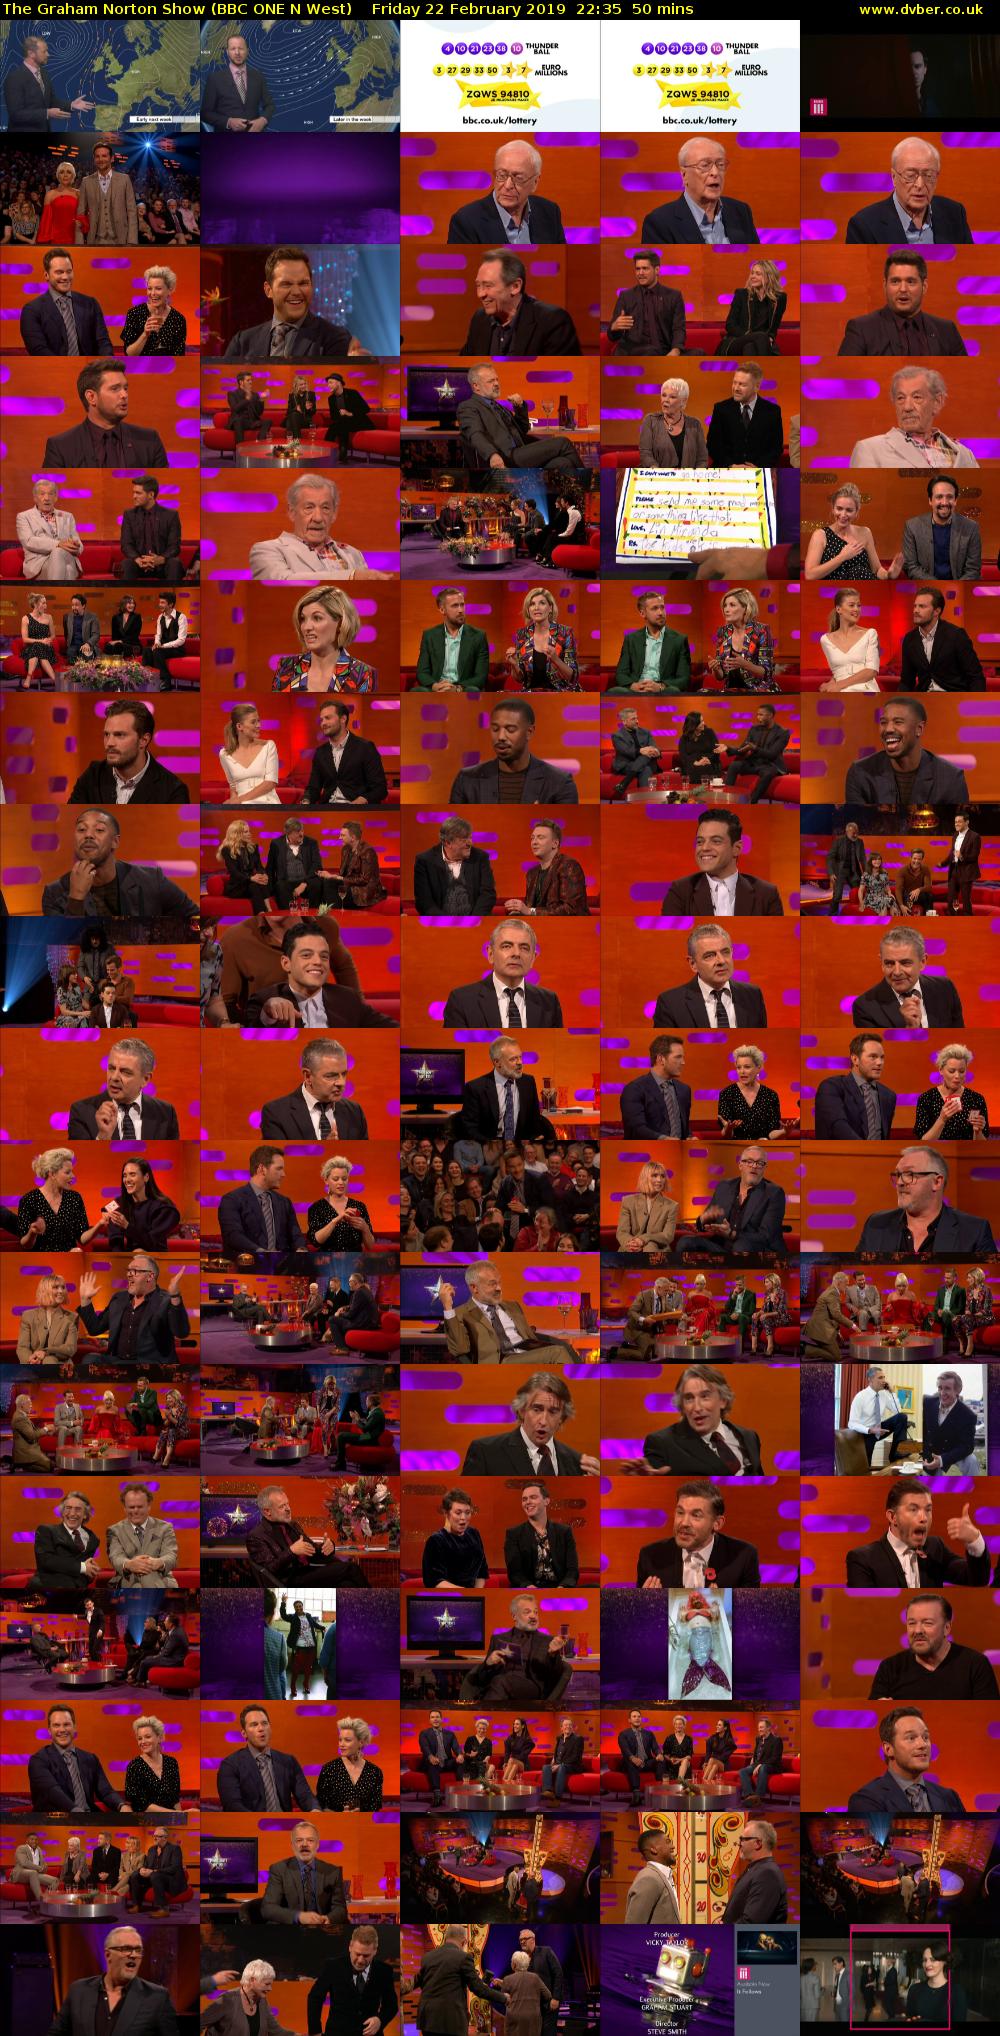 The Graham Norton Show (BBC ONE N West) Friday 22 February 2019 22:35 - 23:25